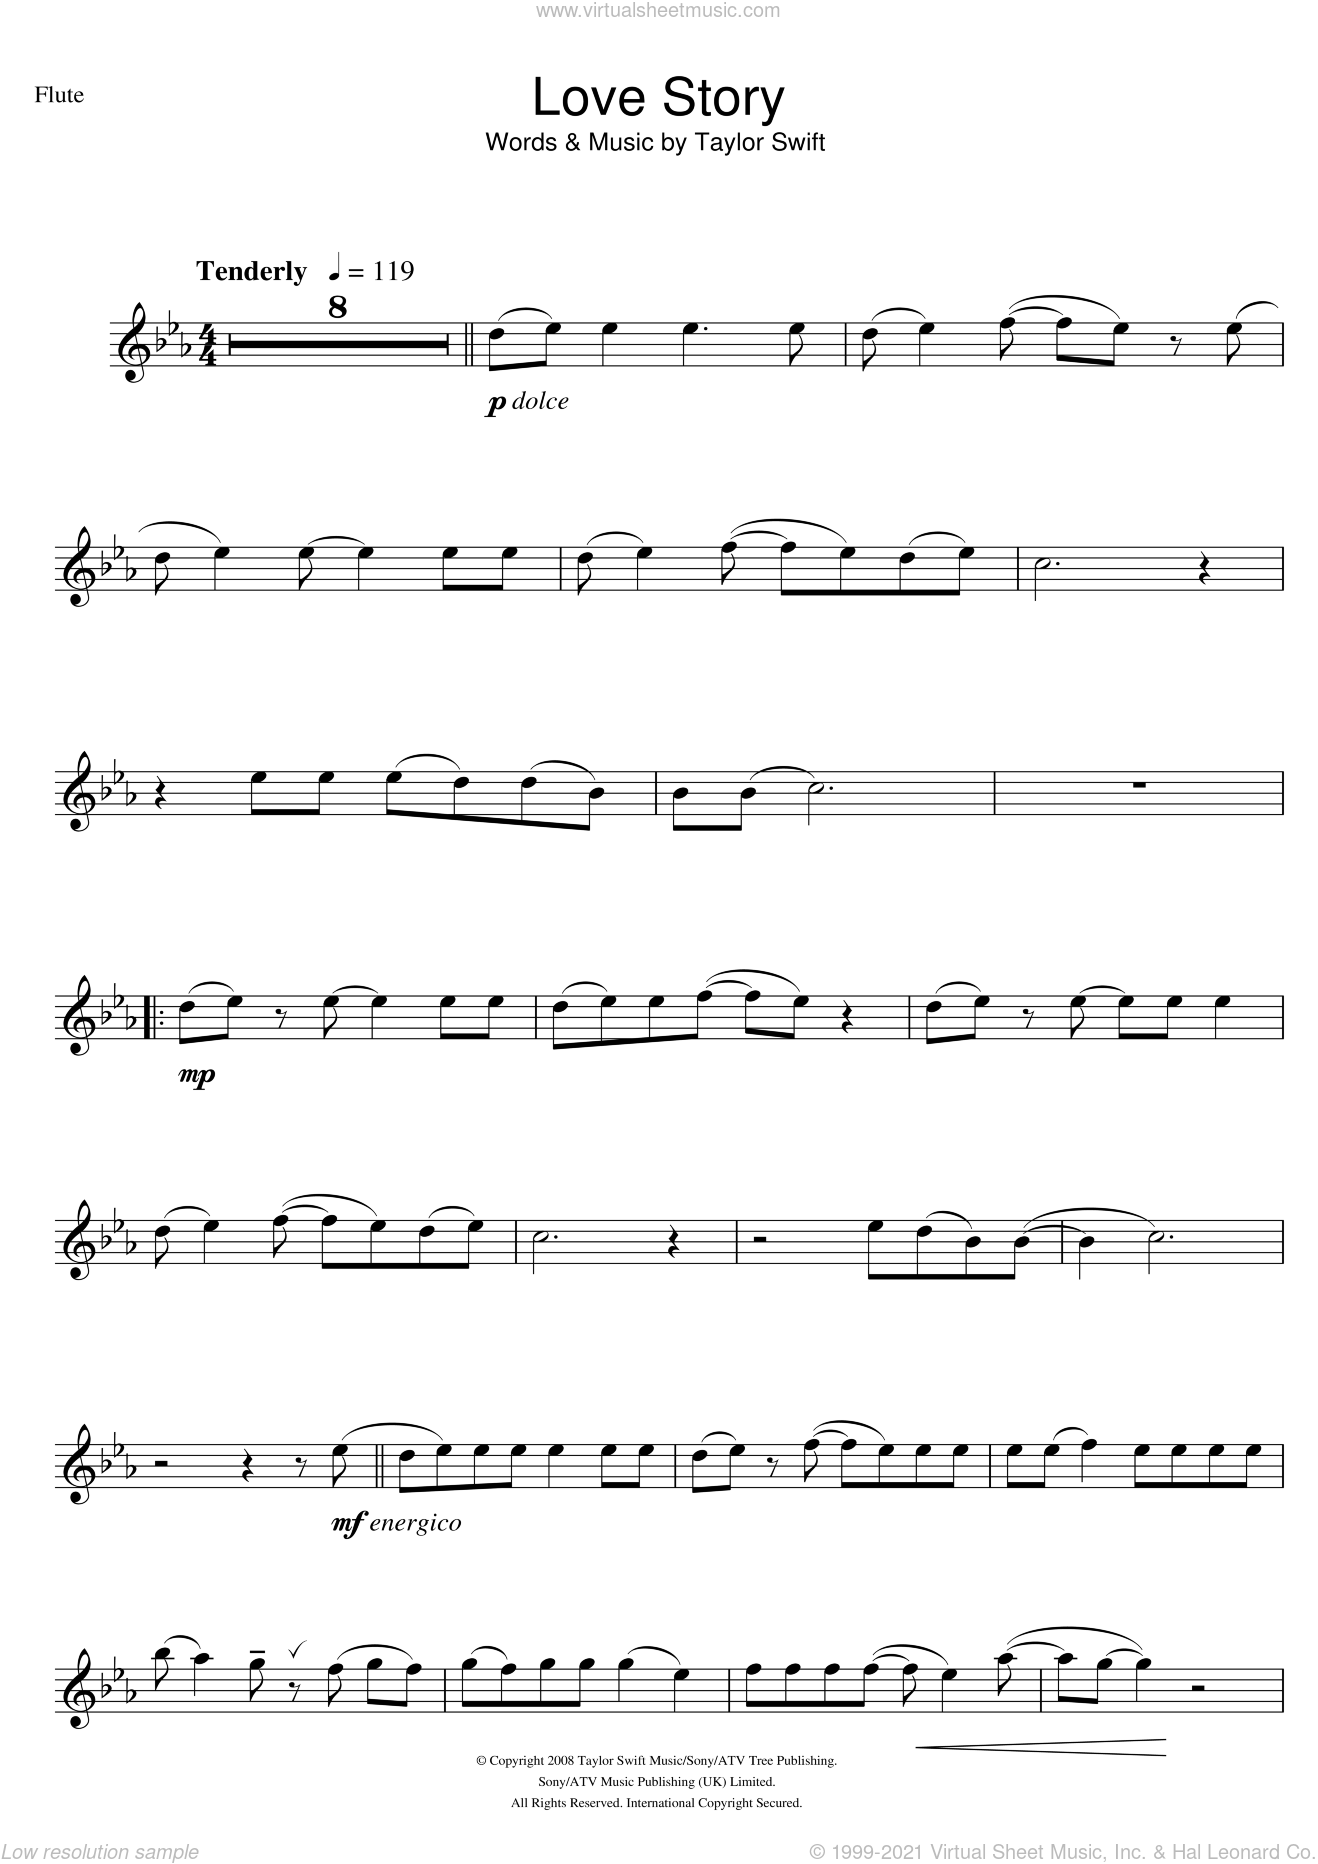 guitar chords for taylor swift love story